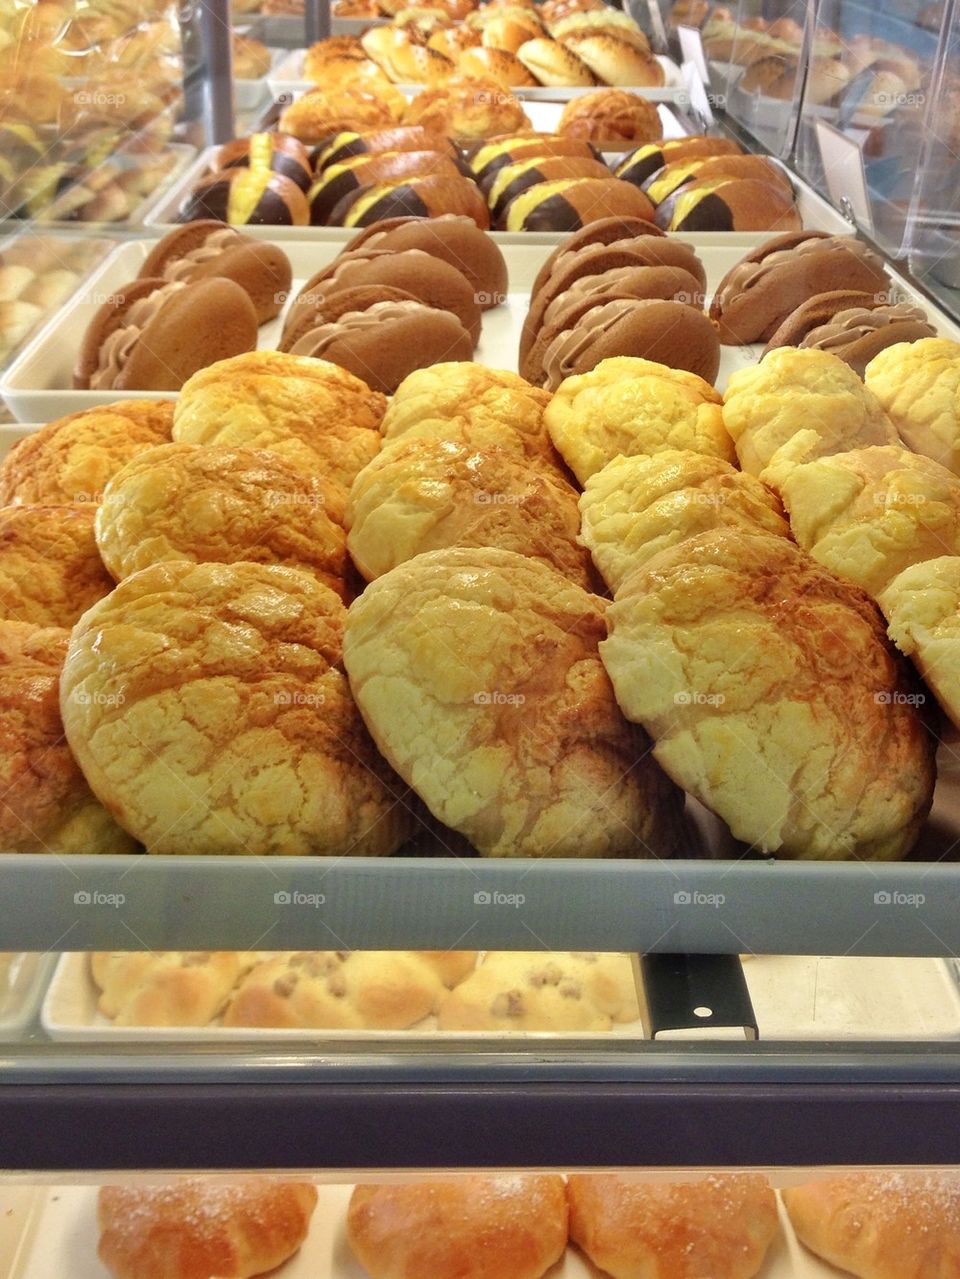 Close-up of a bakery item